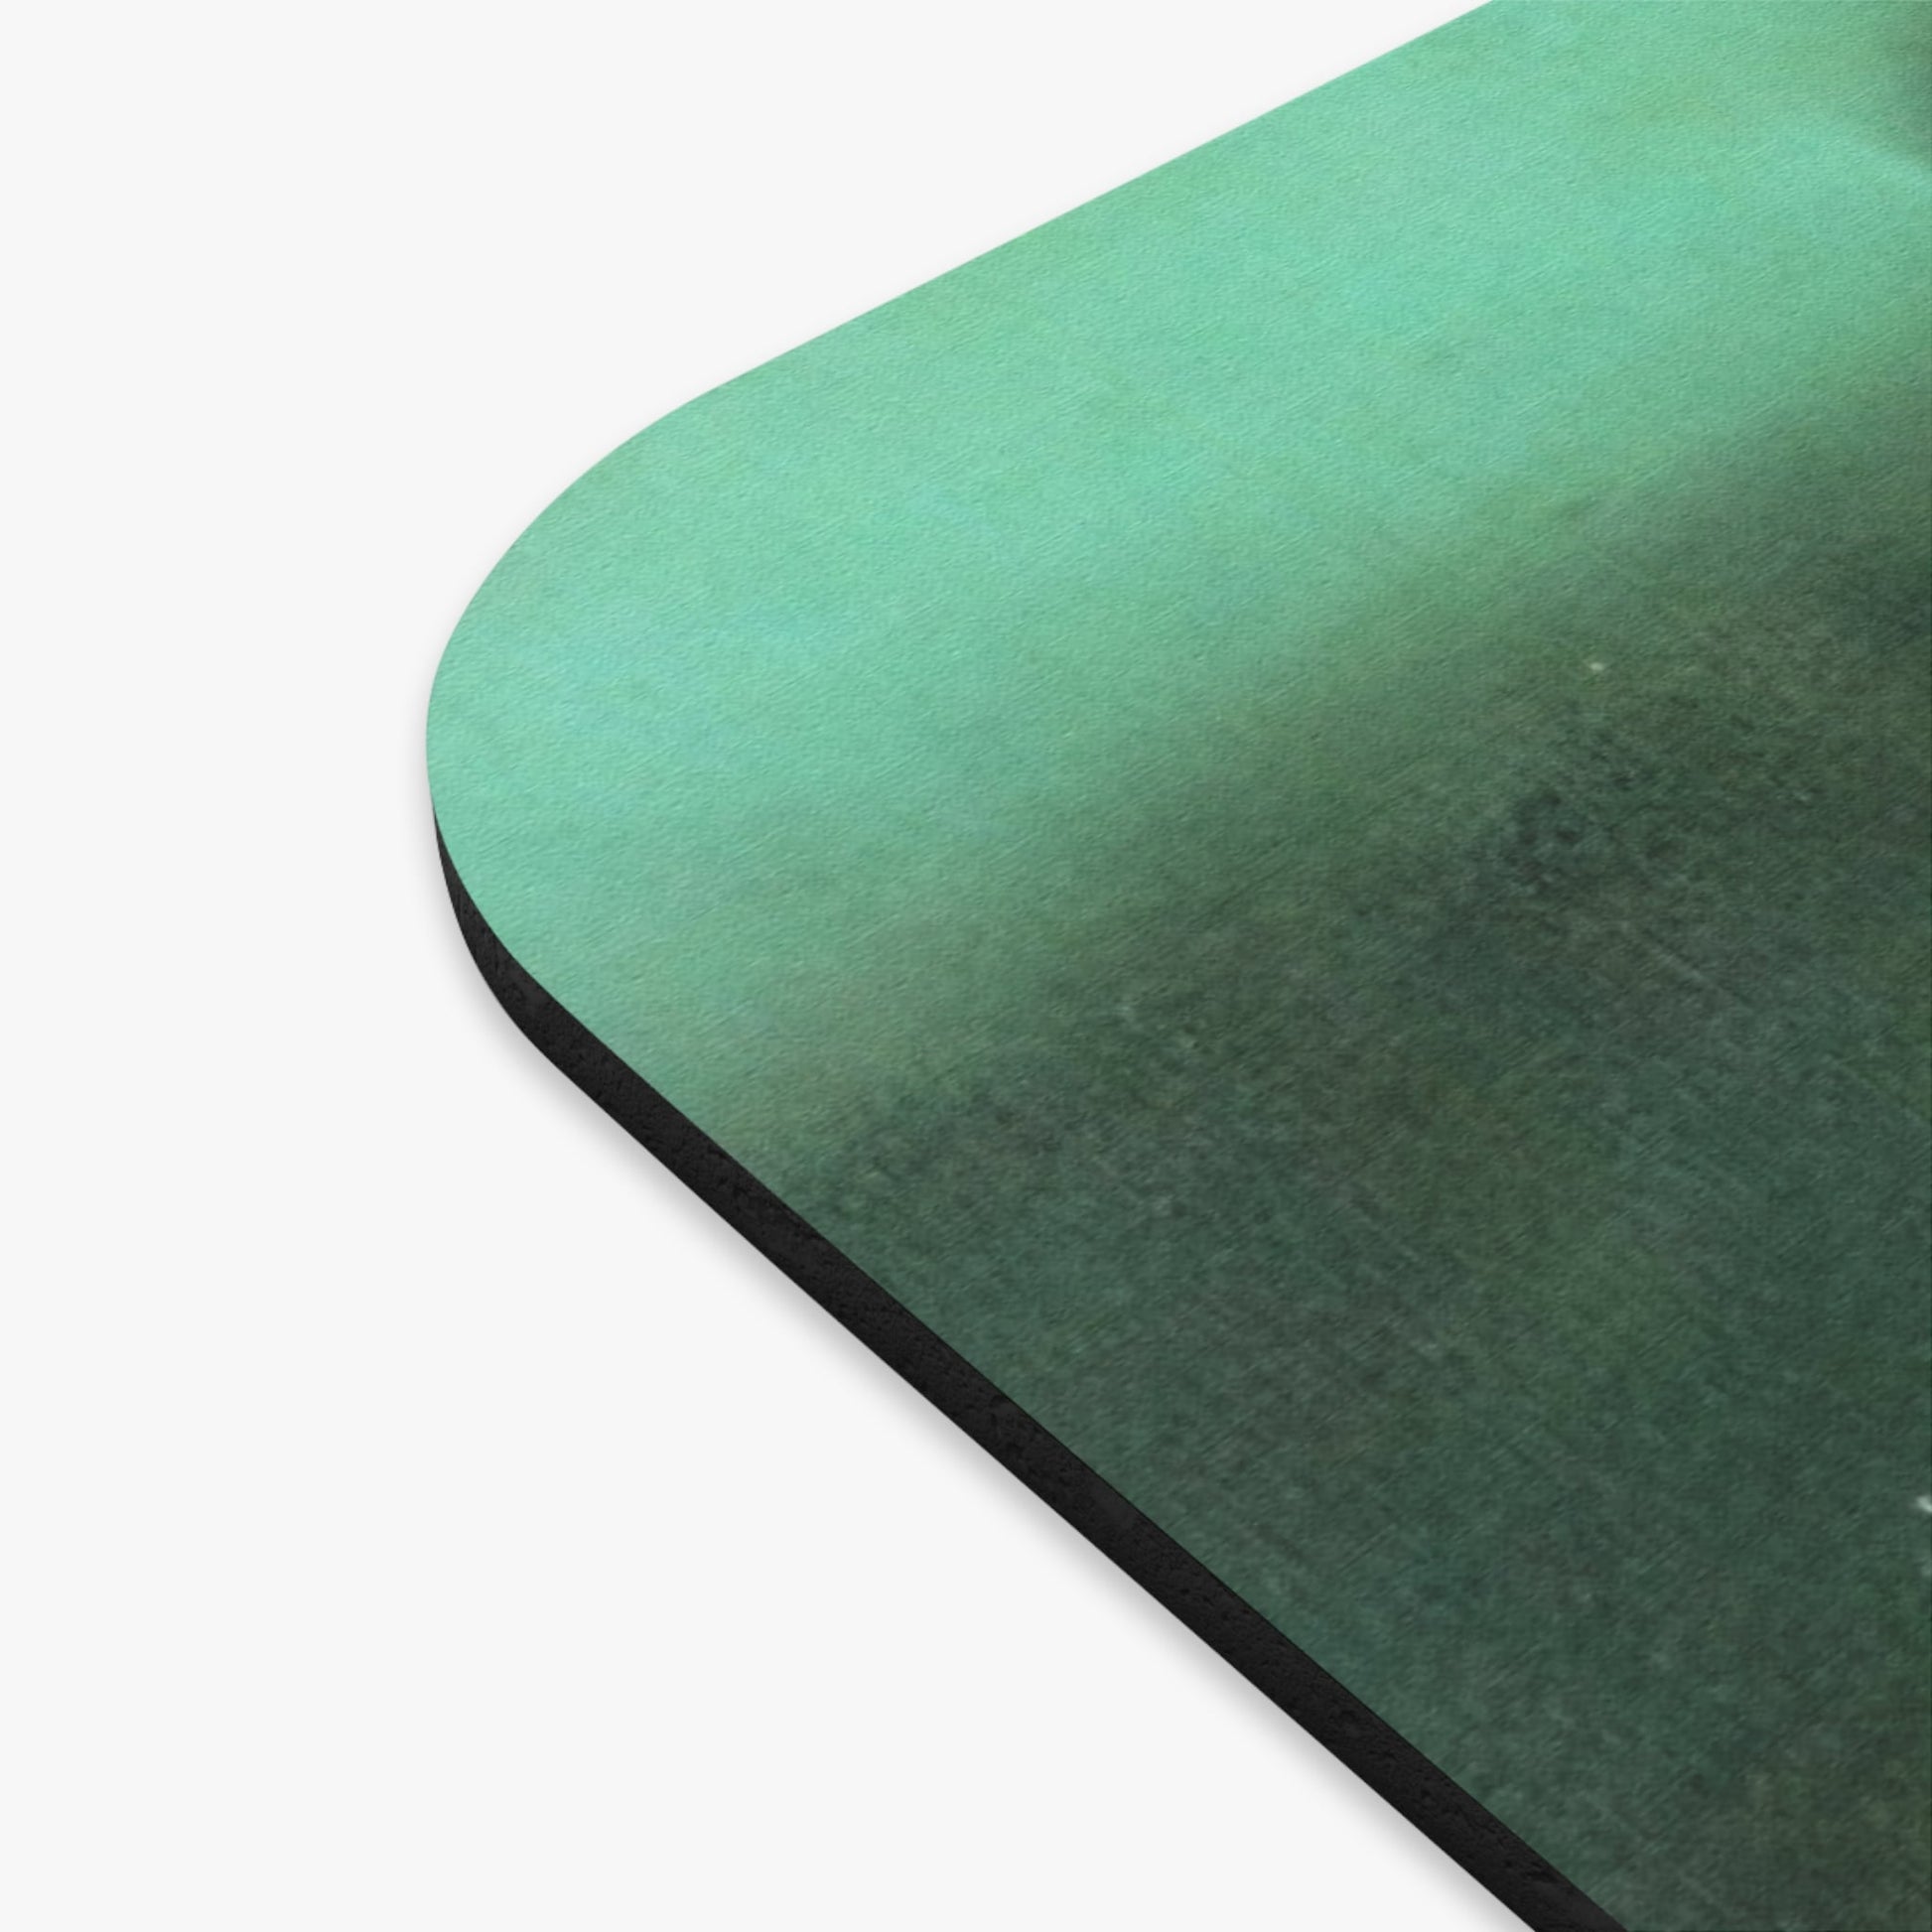 Black and Green Vintage Mouse Pad Design Close Up